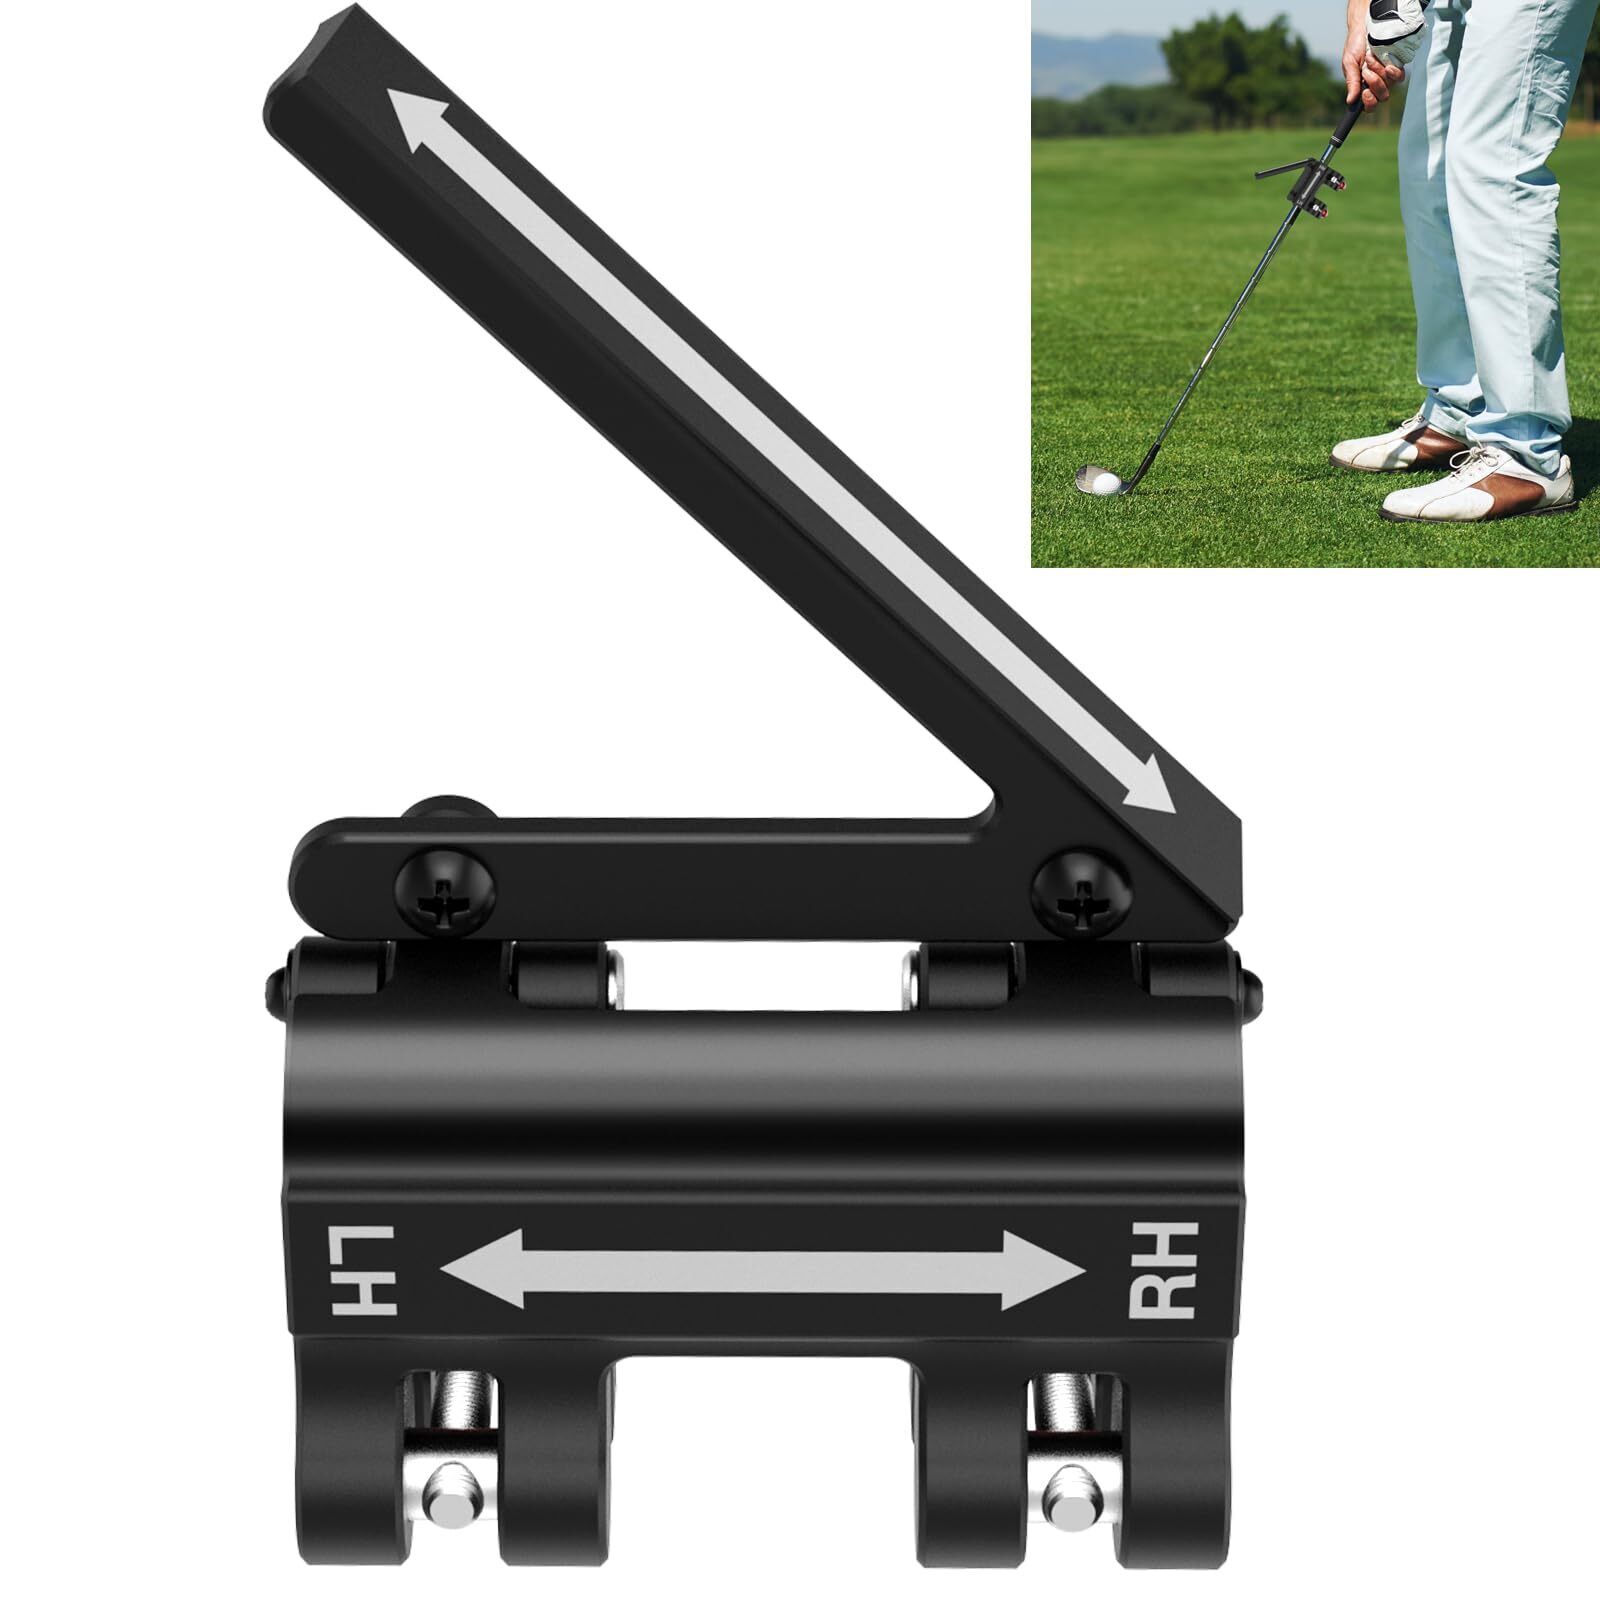 Straightaway Swing Trainer Improve Your Golf Game Precision Confidence